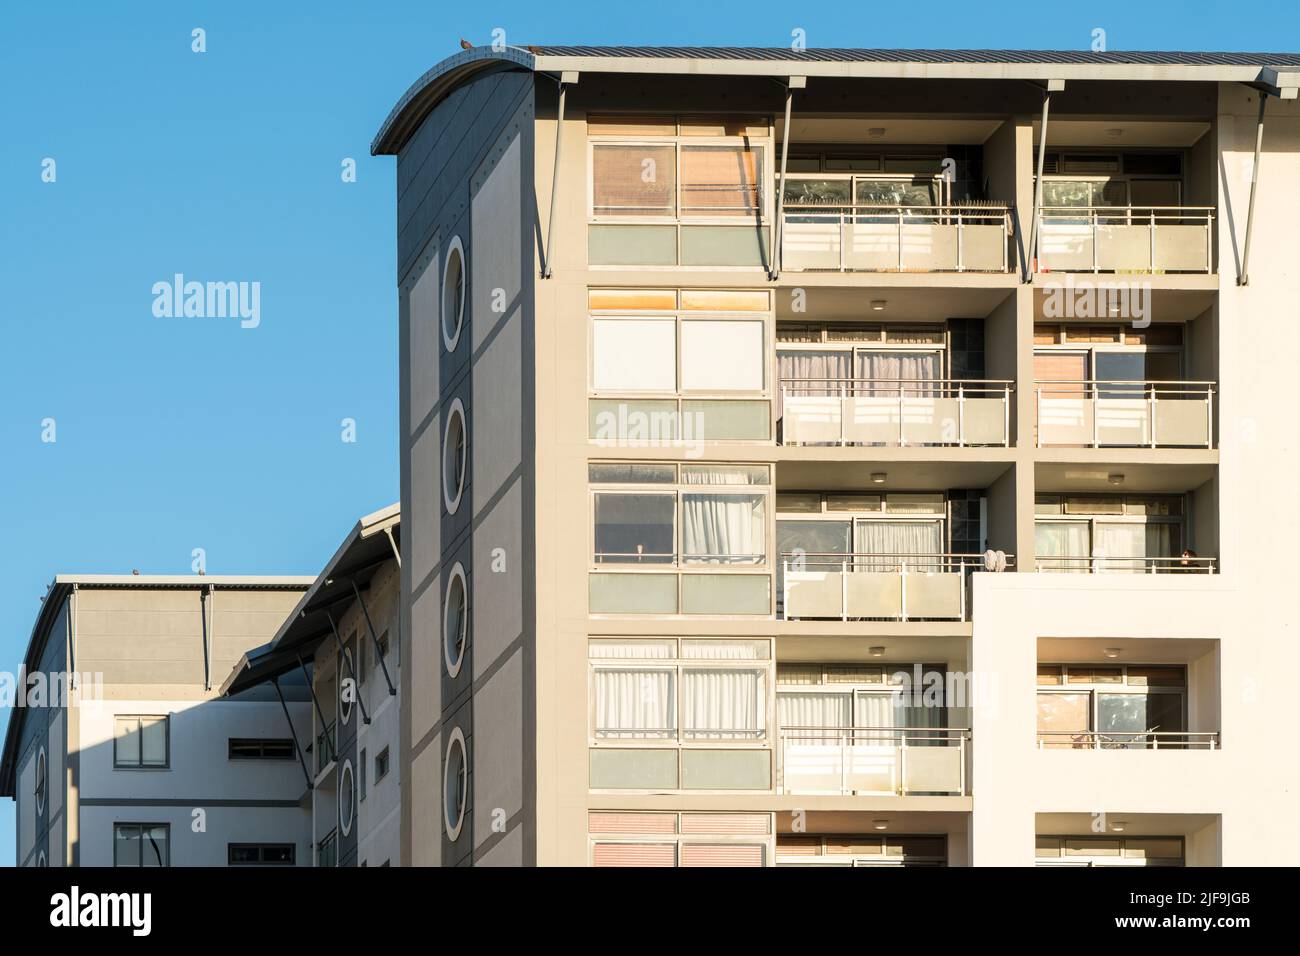 closeup of a section of apartment block or apartments showing the exterior facade with balconies in a modern or contemporary architectural design Stock Photo